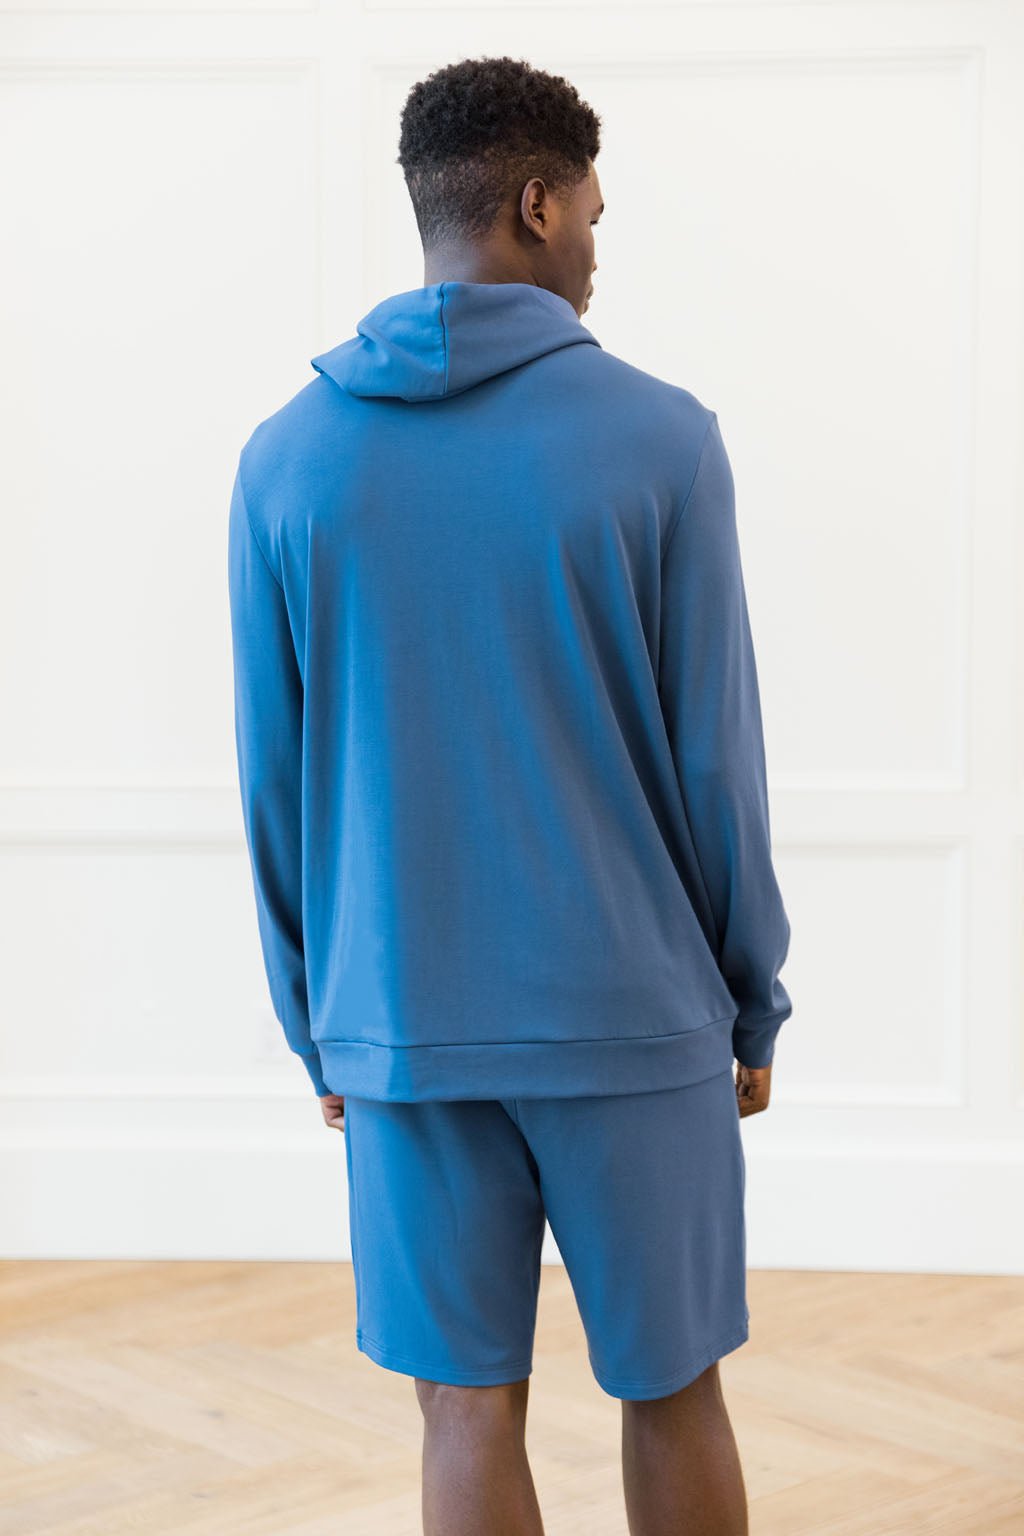 Cobalt Bamboo Hoodie worn by a man with his back facing the camera. The man is standing in front of white background.